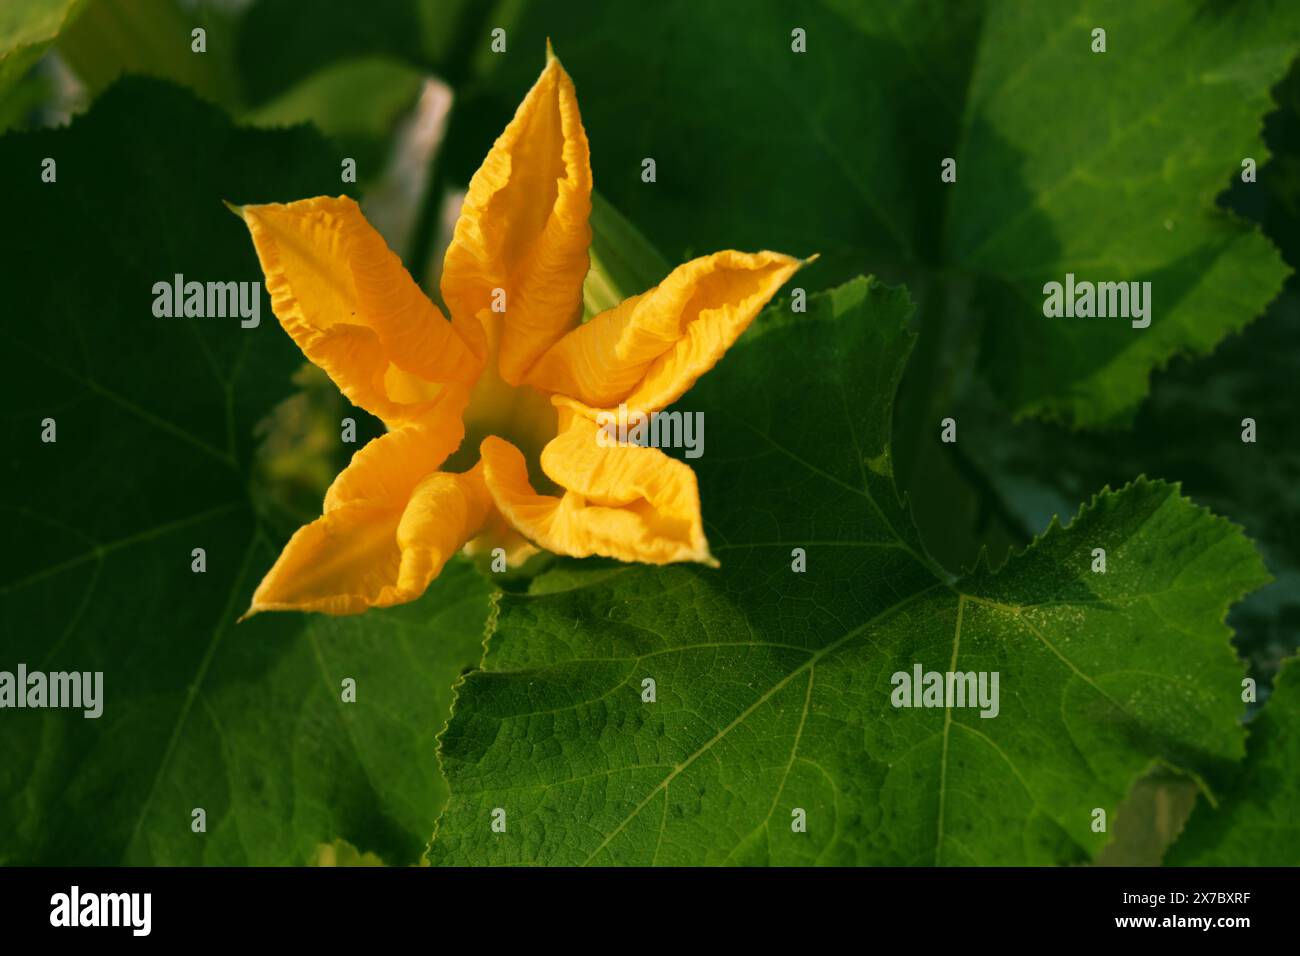 Blooming pumpkin flower with green leaf in rooftop garden, close up beautiful flowers from vegetable plant Stock Photo